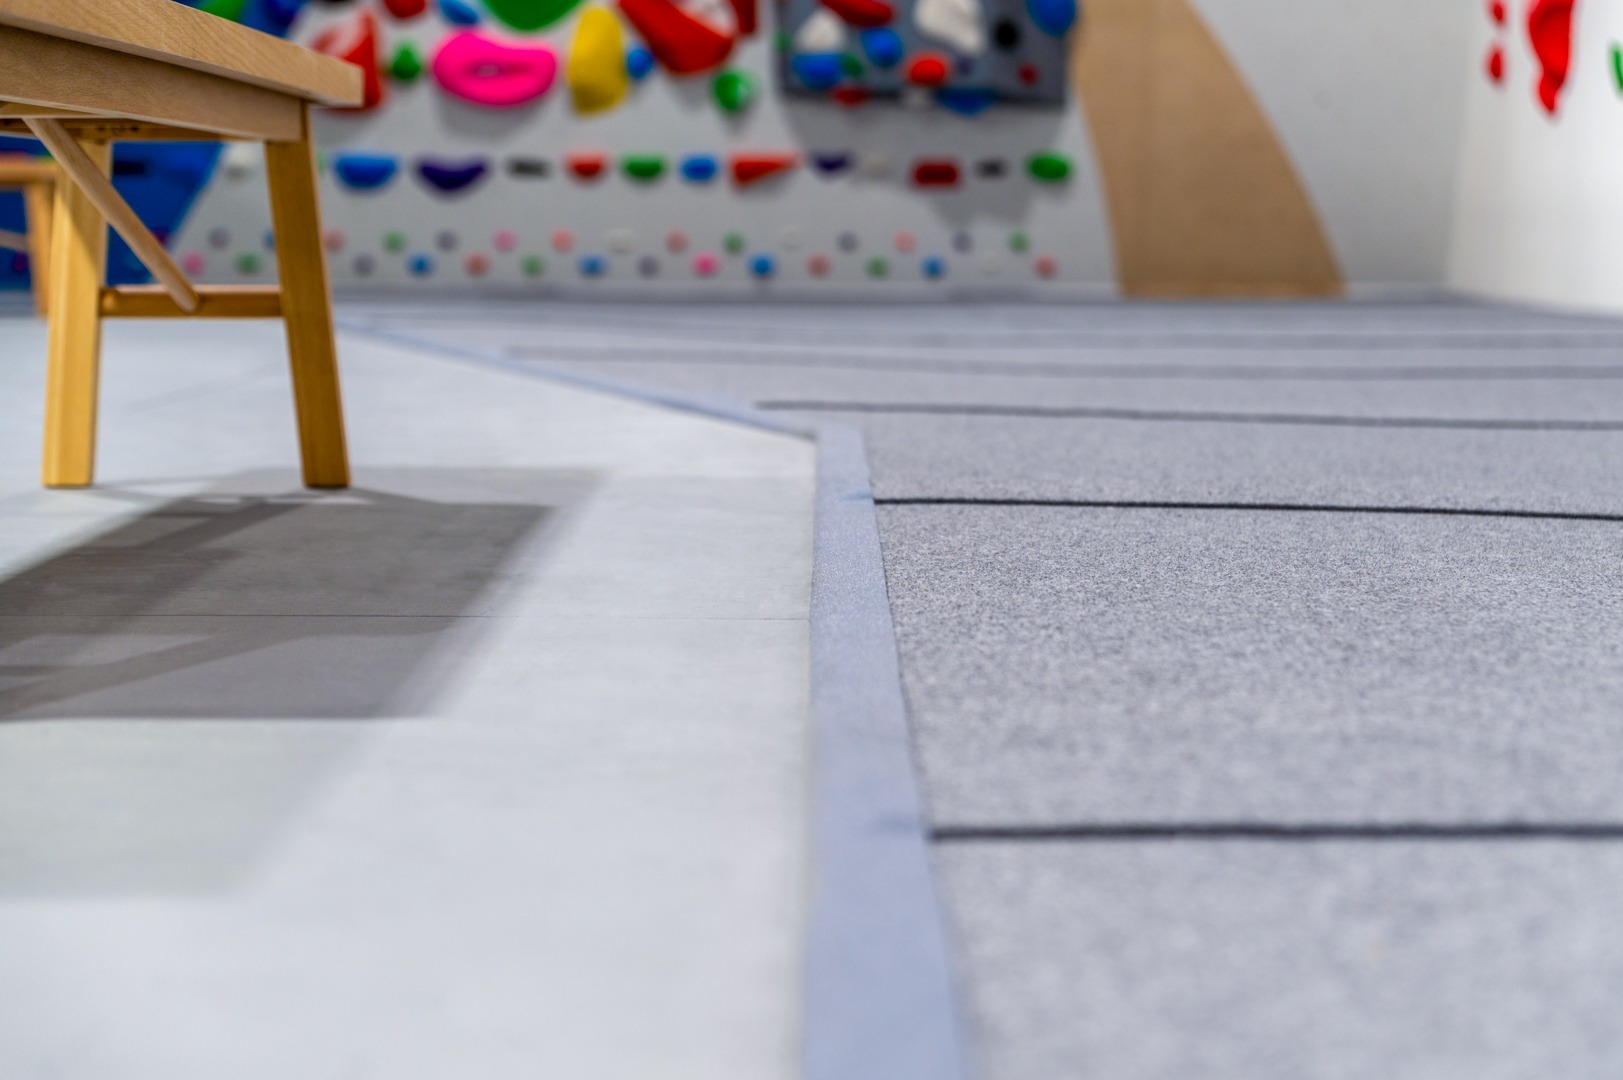 A gym built by ICP with seamless grey climbing mats.